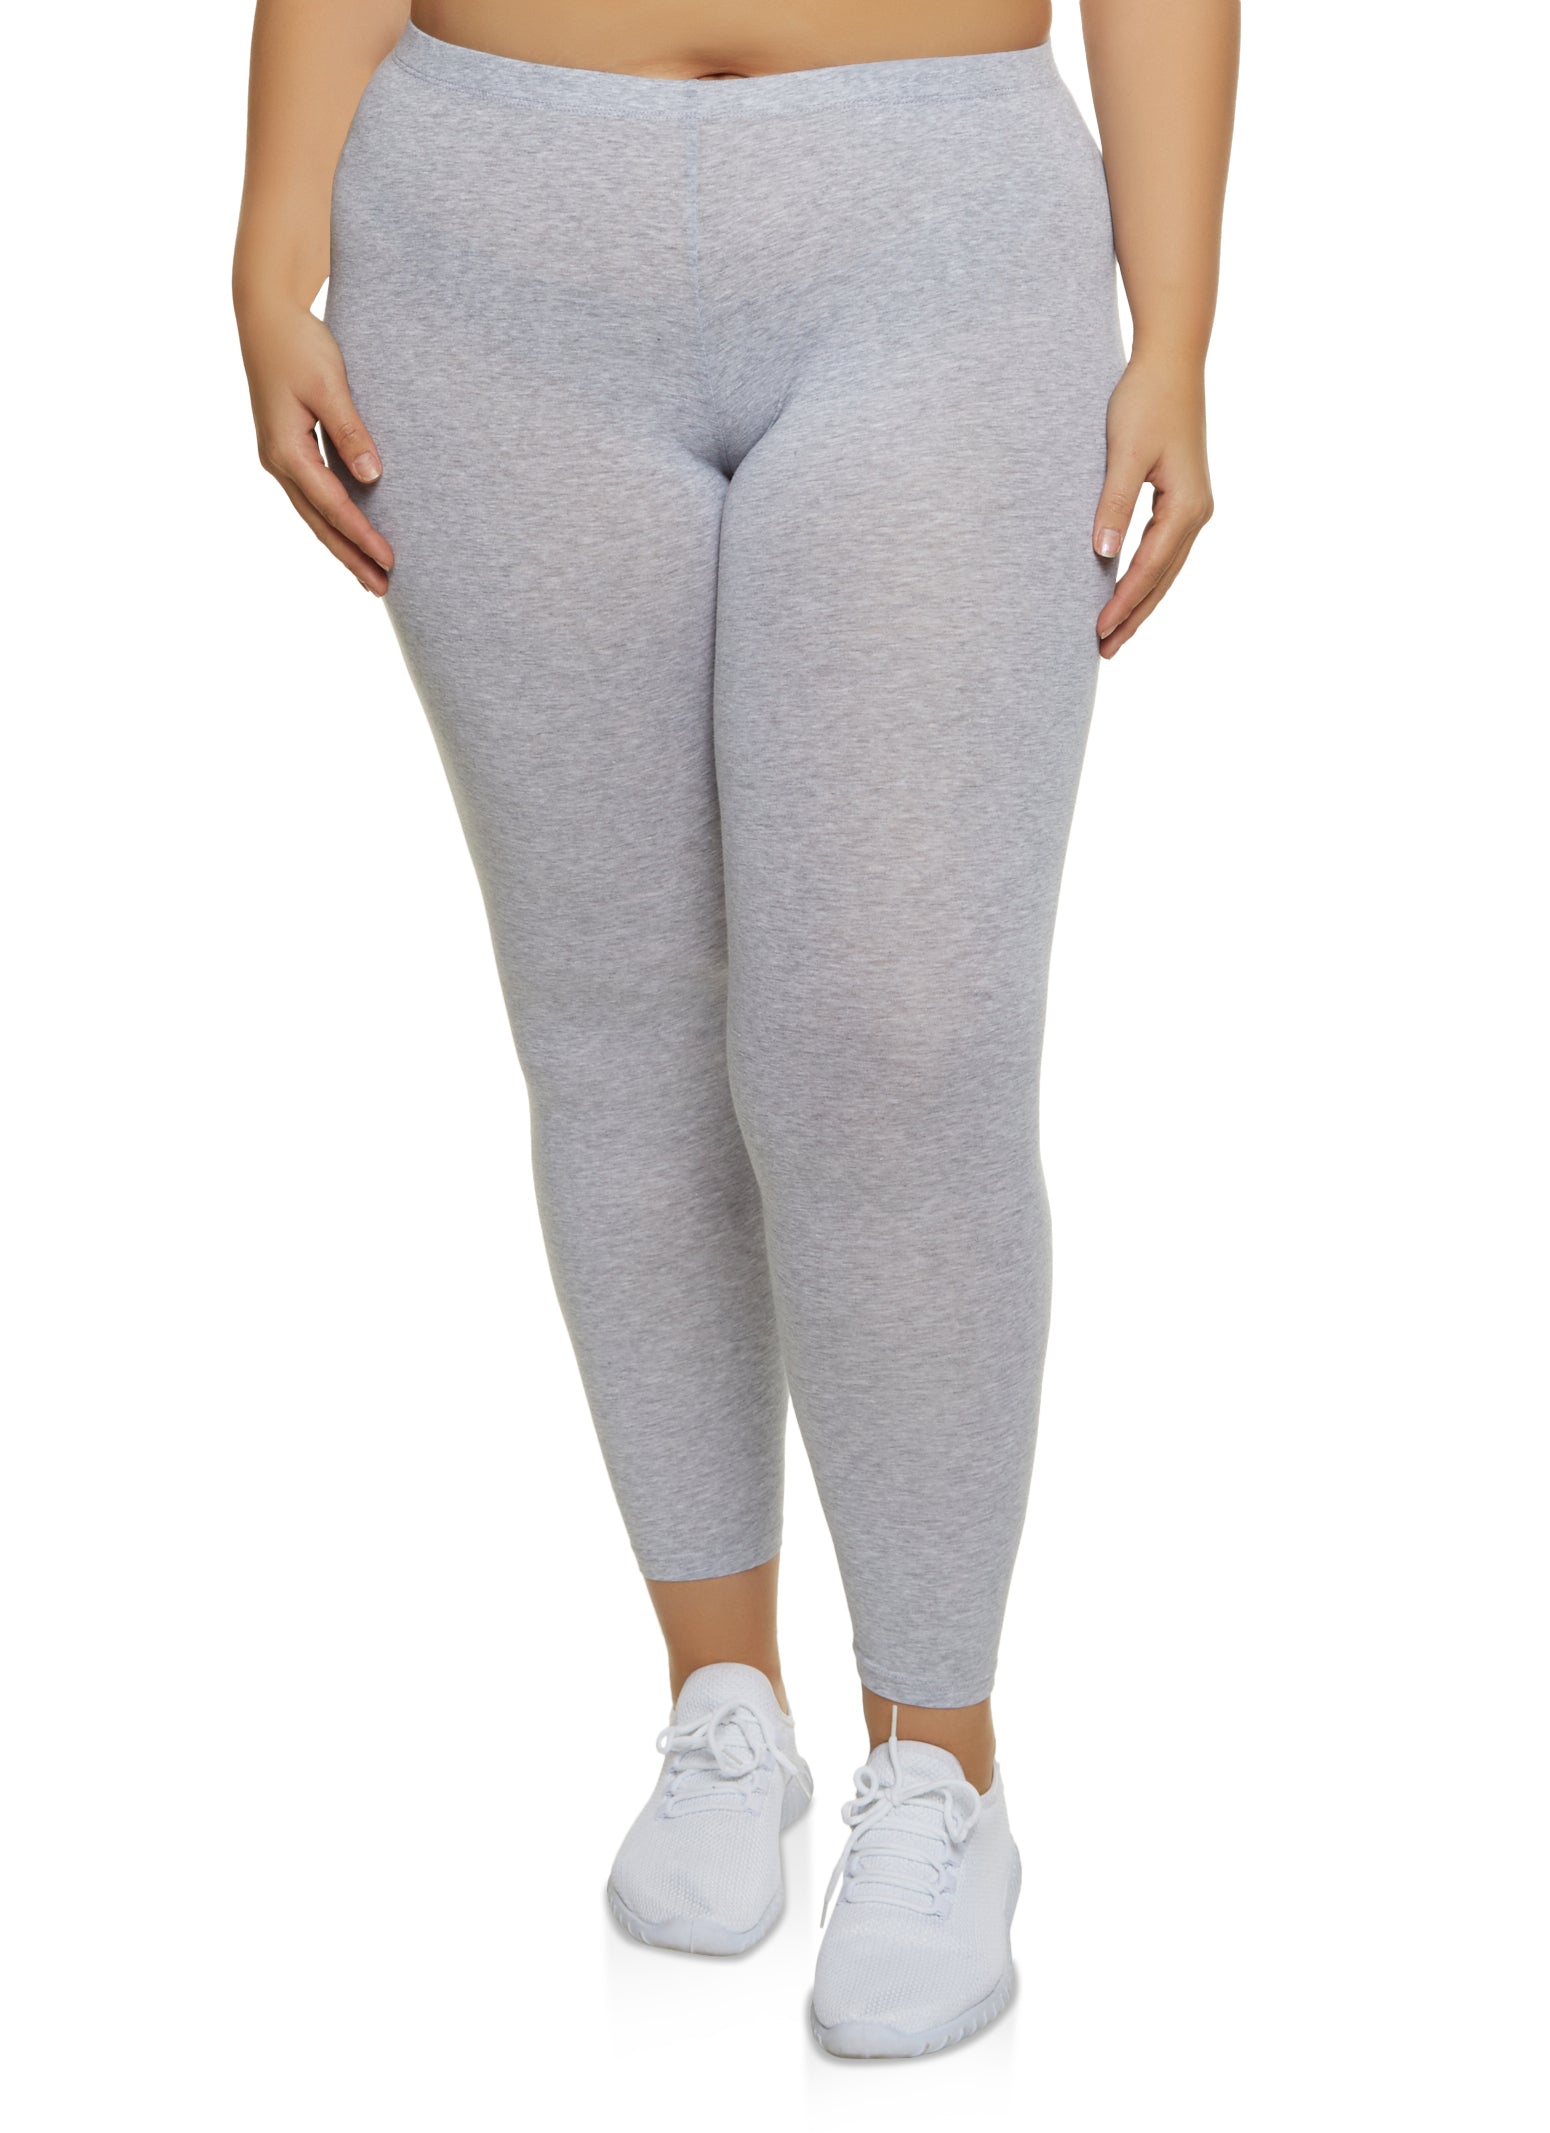 Plus Size Solid High Rise Leggings - Heather